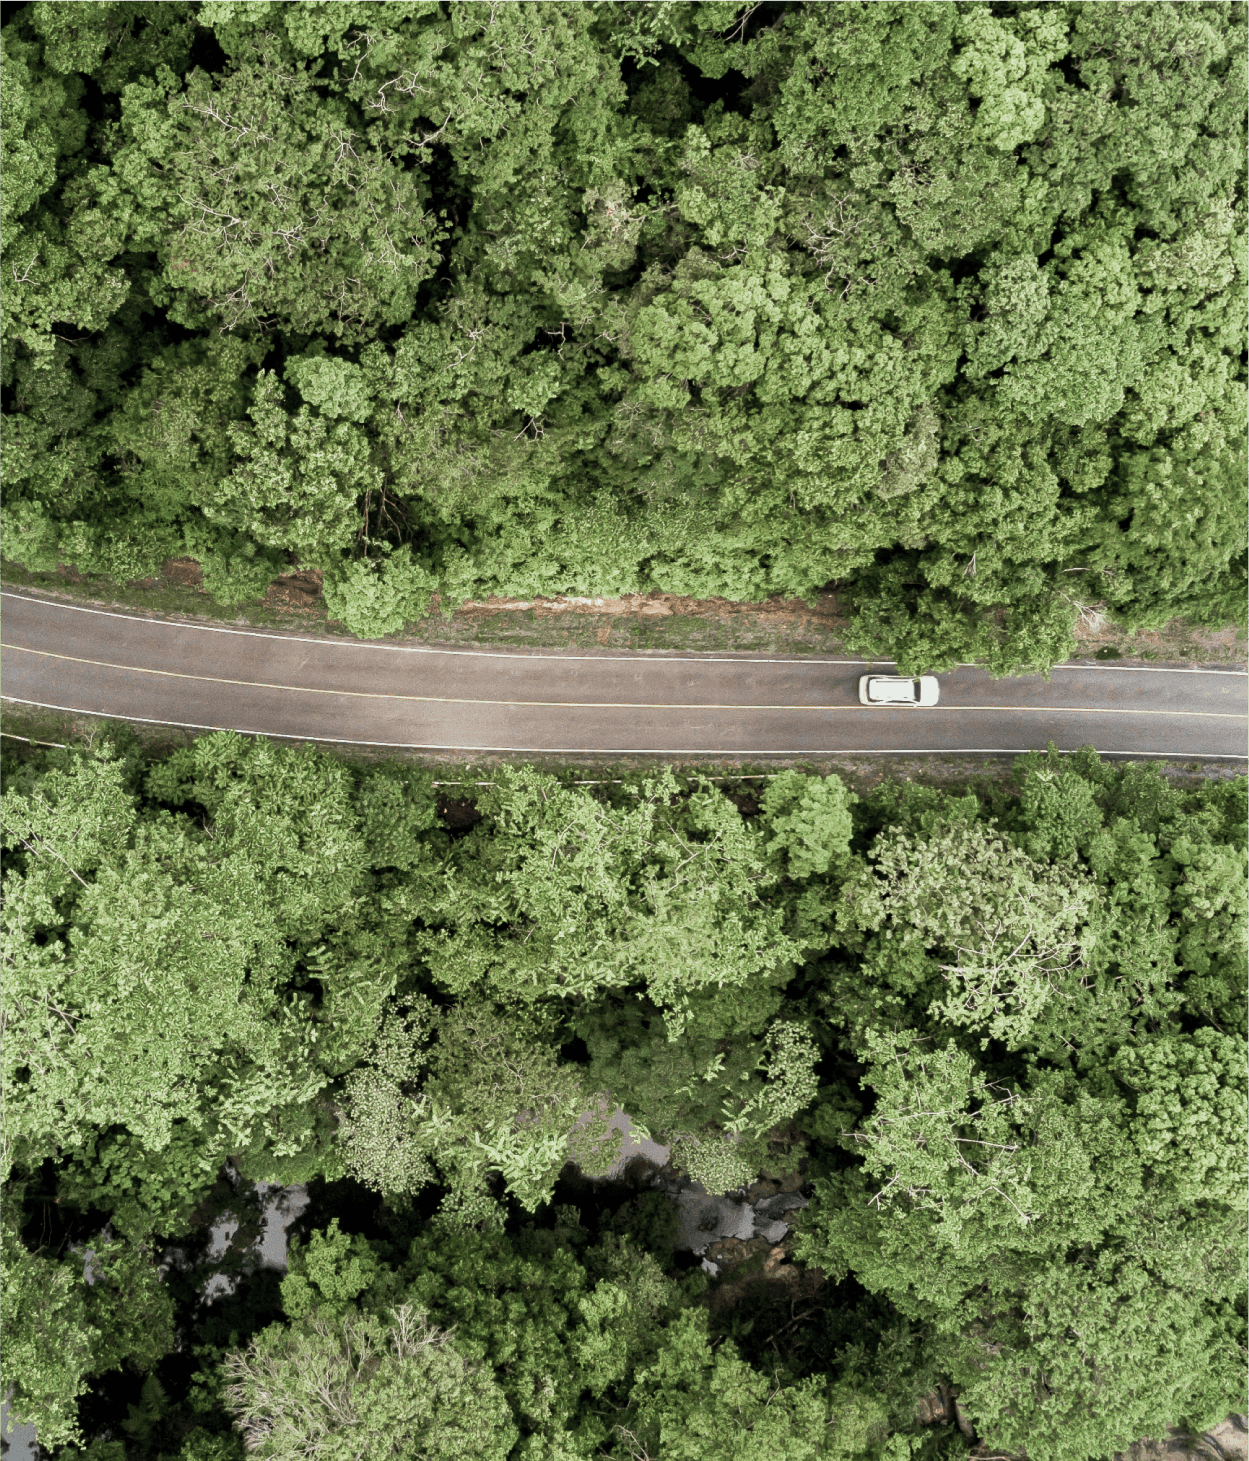 Aerial view asphalt road and green forest, Forest road going through forest with car adventure view from above, Ecosystem and ecology healthy environment concepts and background.